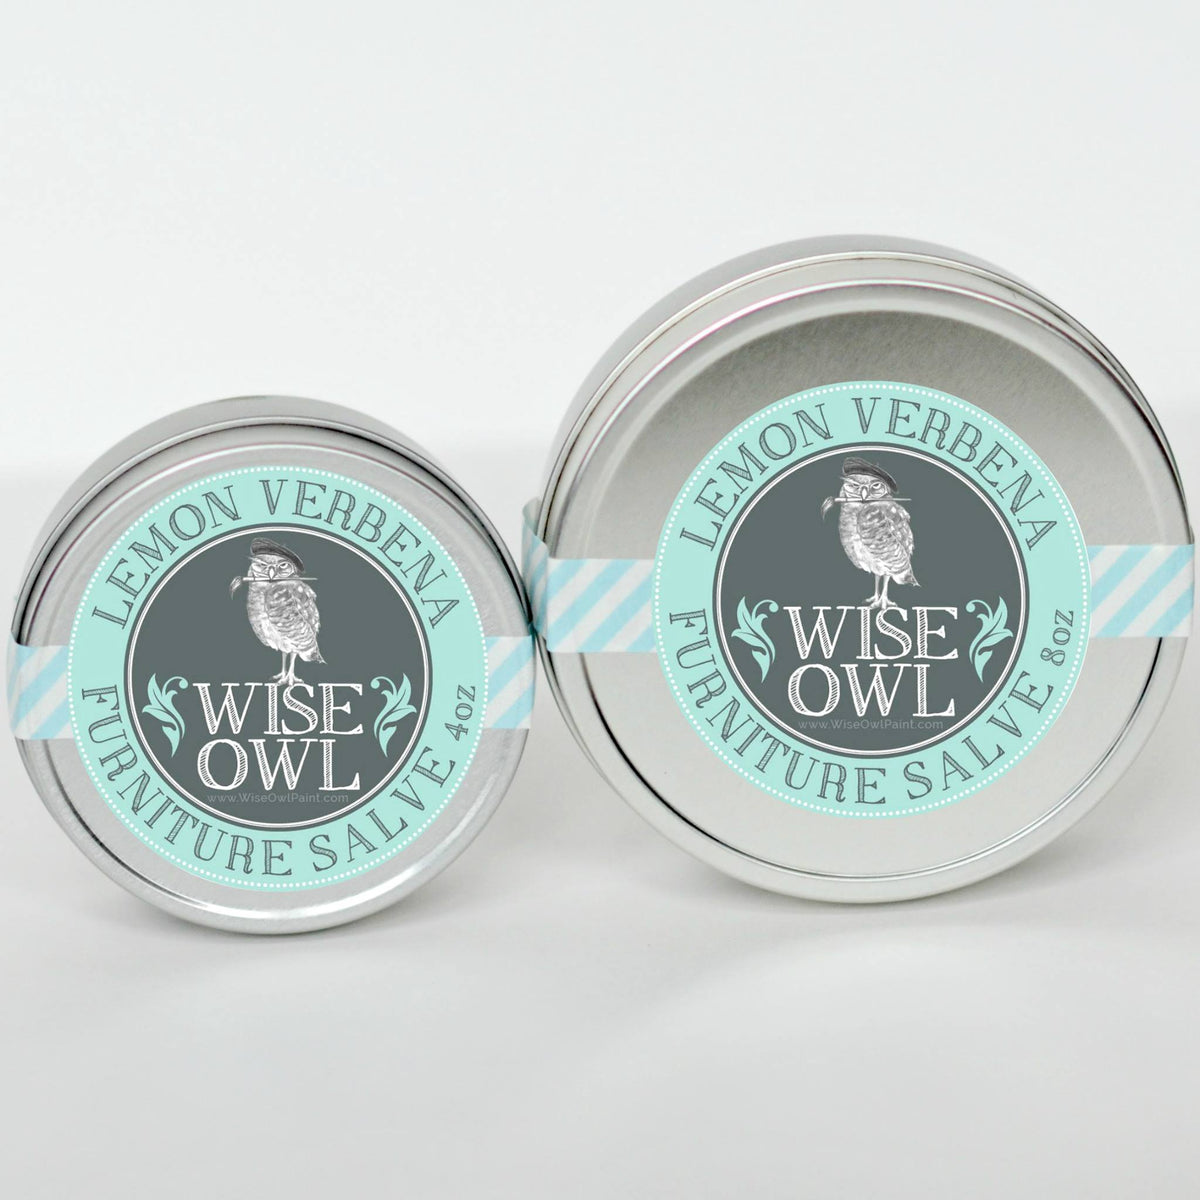 Wise Owl Furniture Salve and Brush Bundle - 4oz. or 8oz. – This